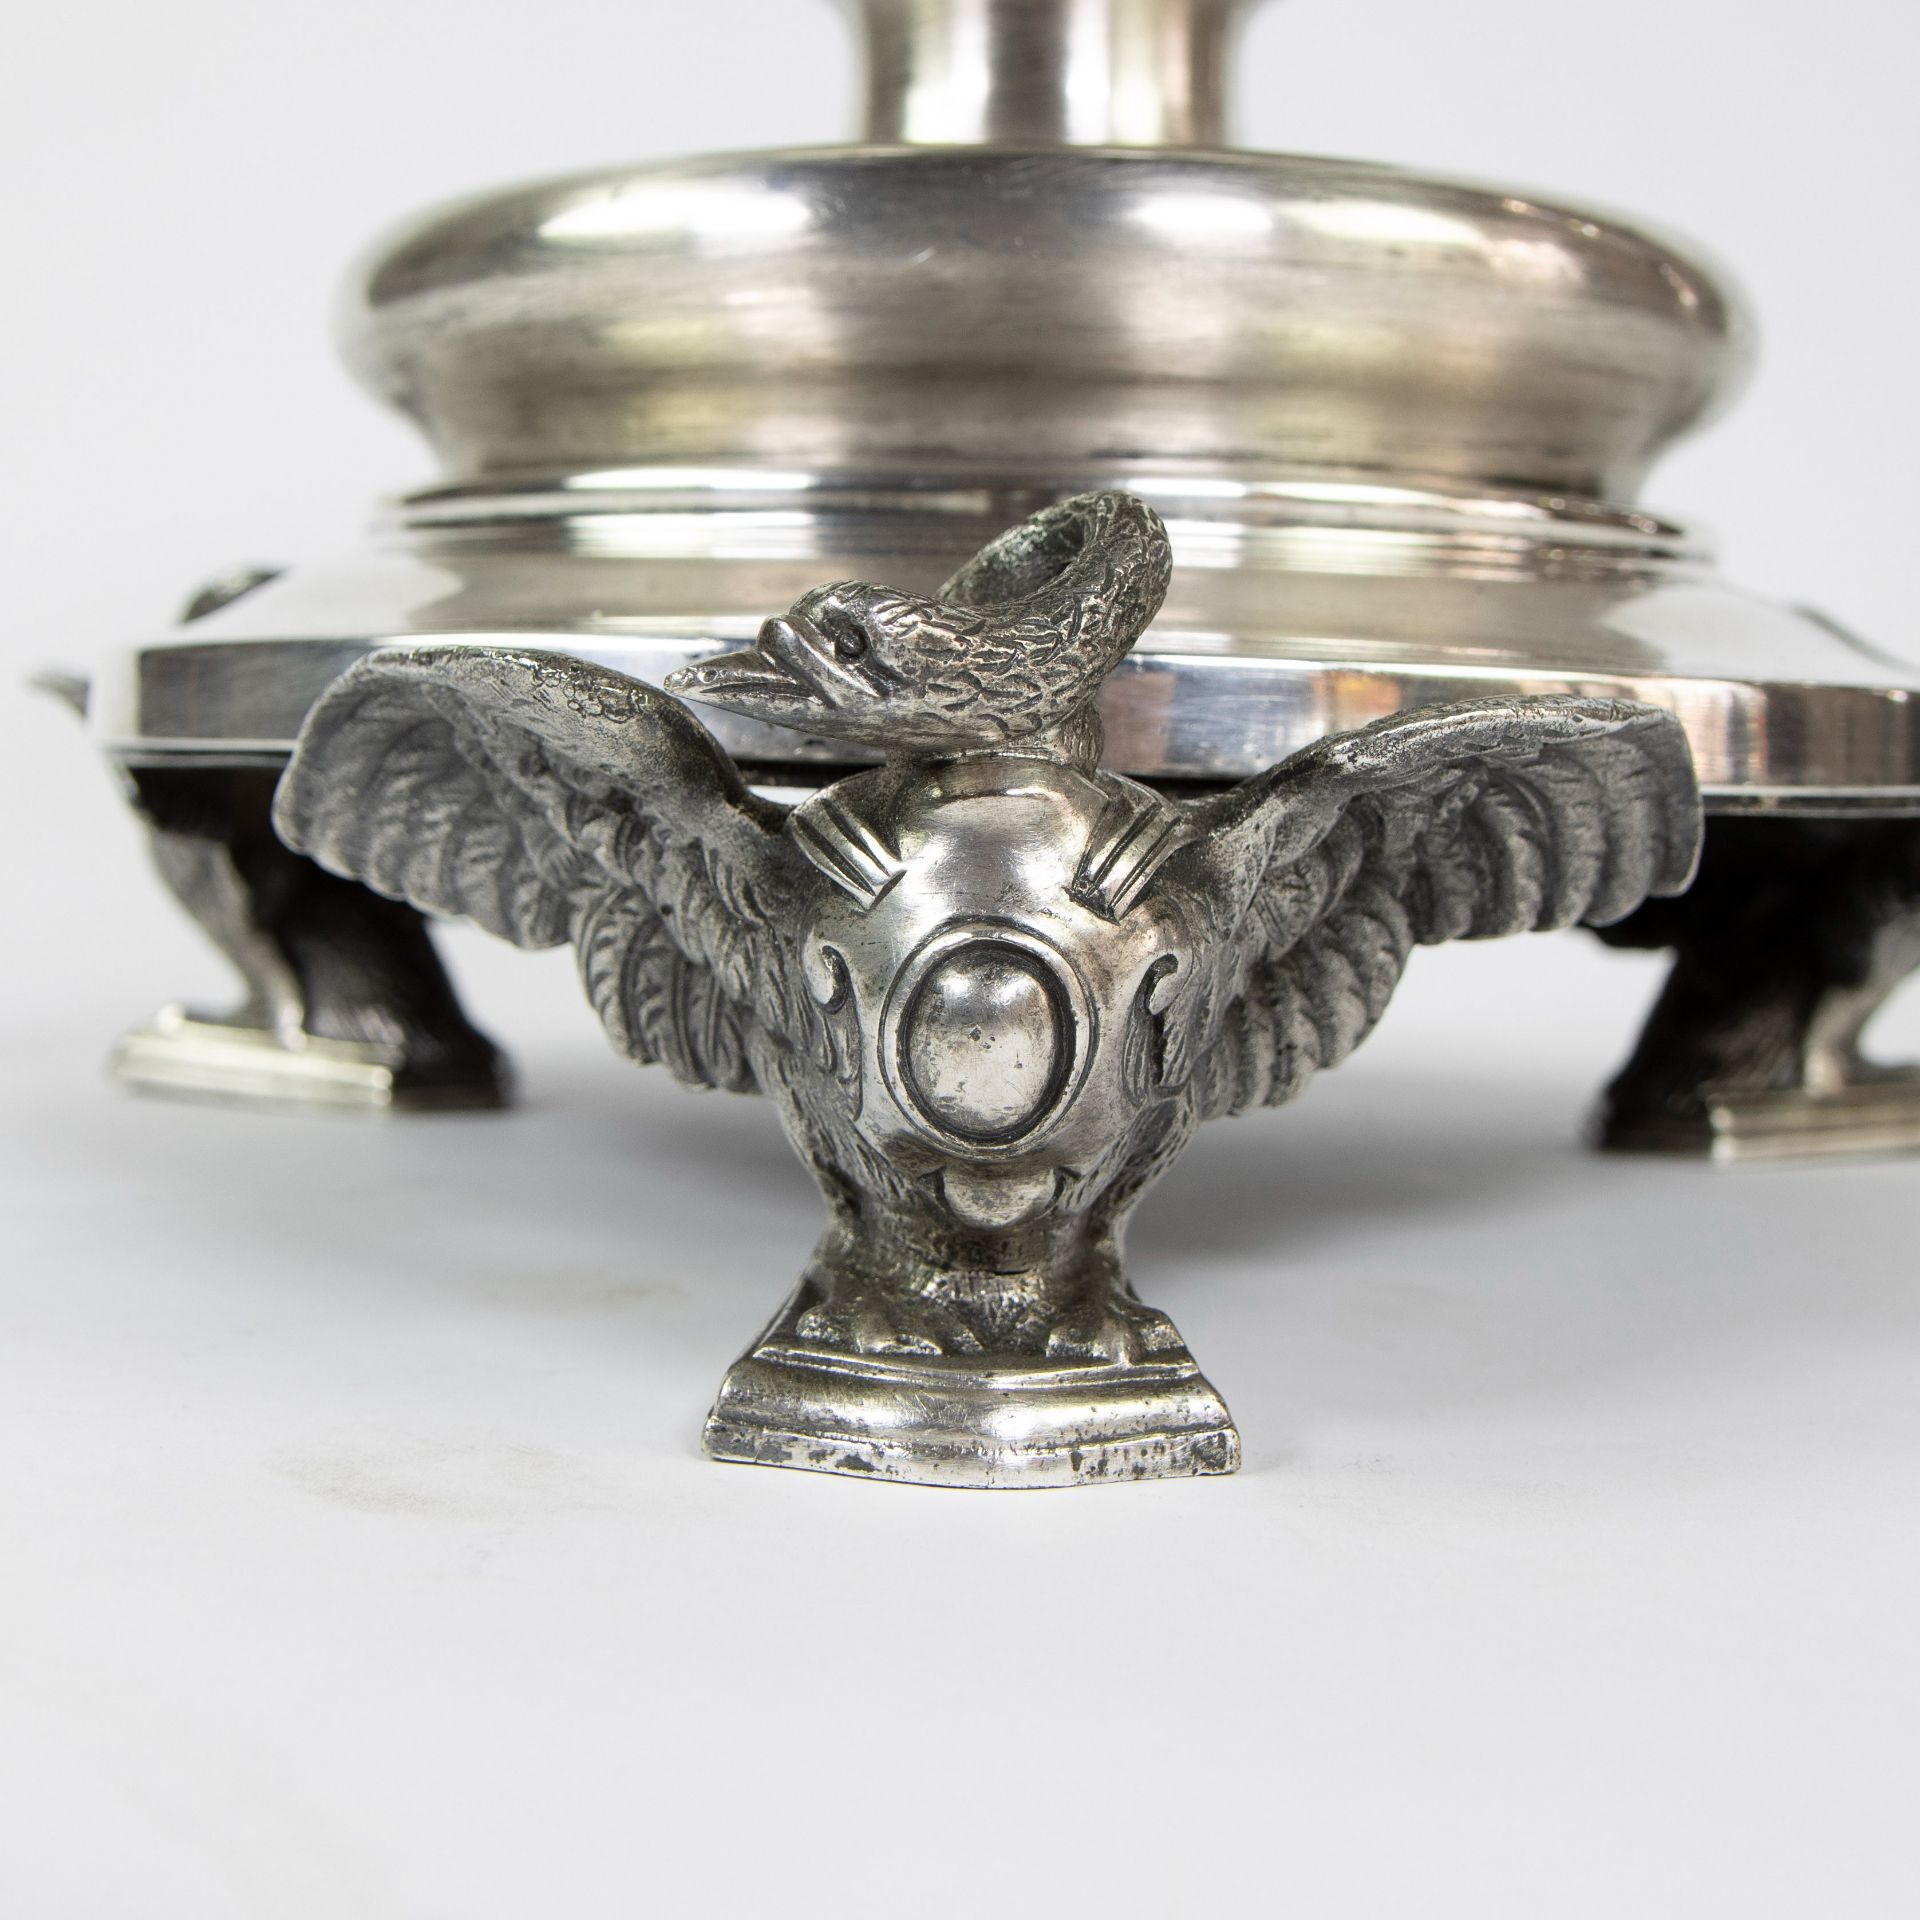 Silver plated candlestick with three swans as legs - Image 3 of 5